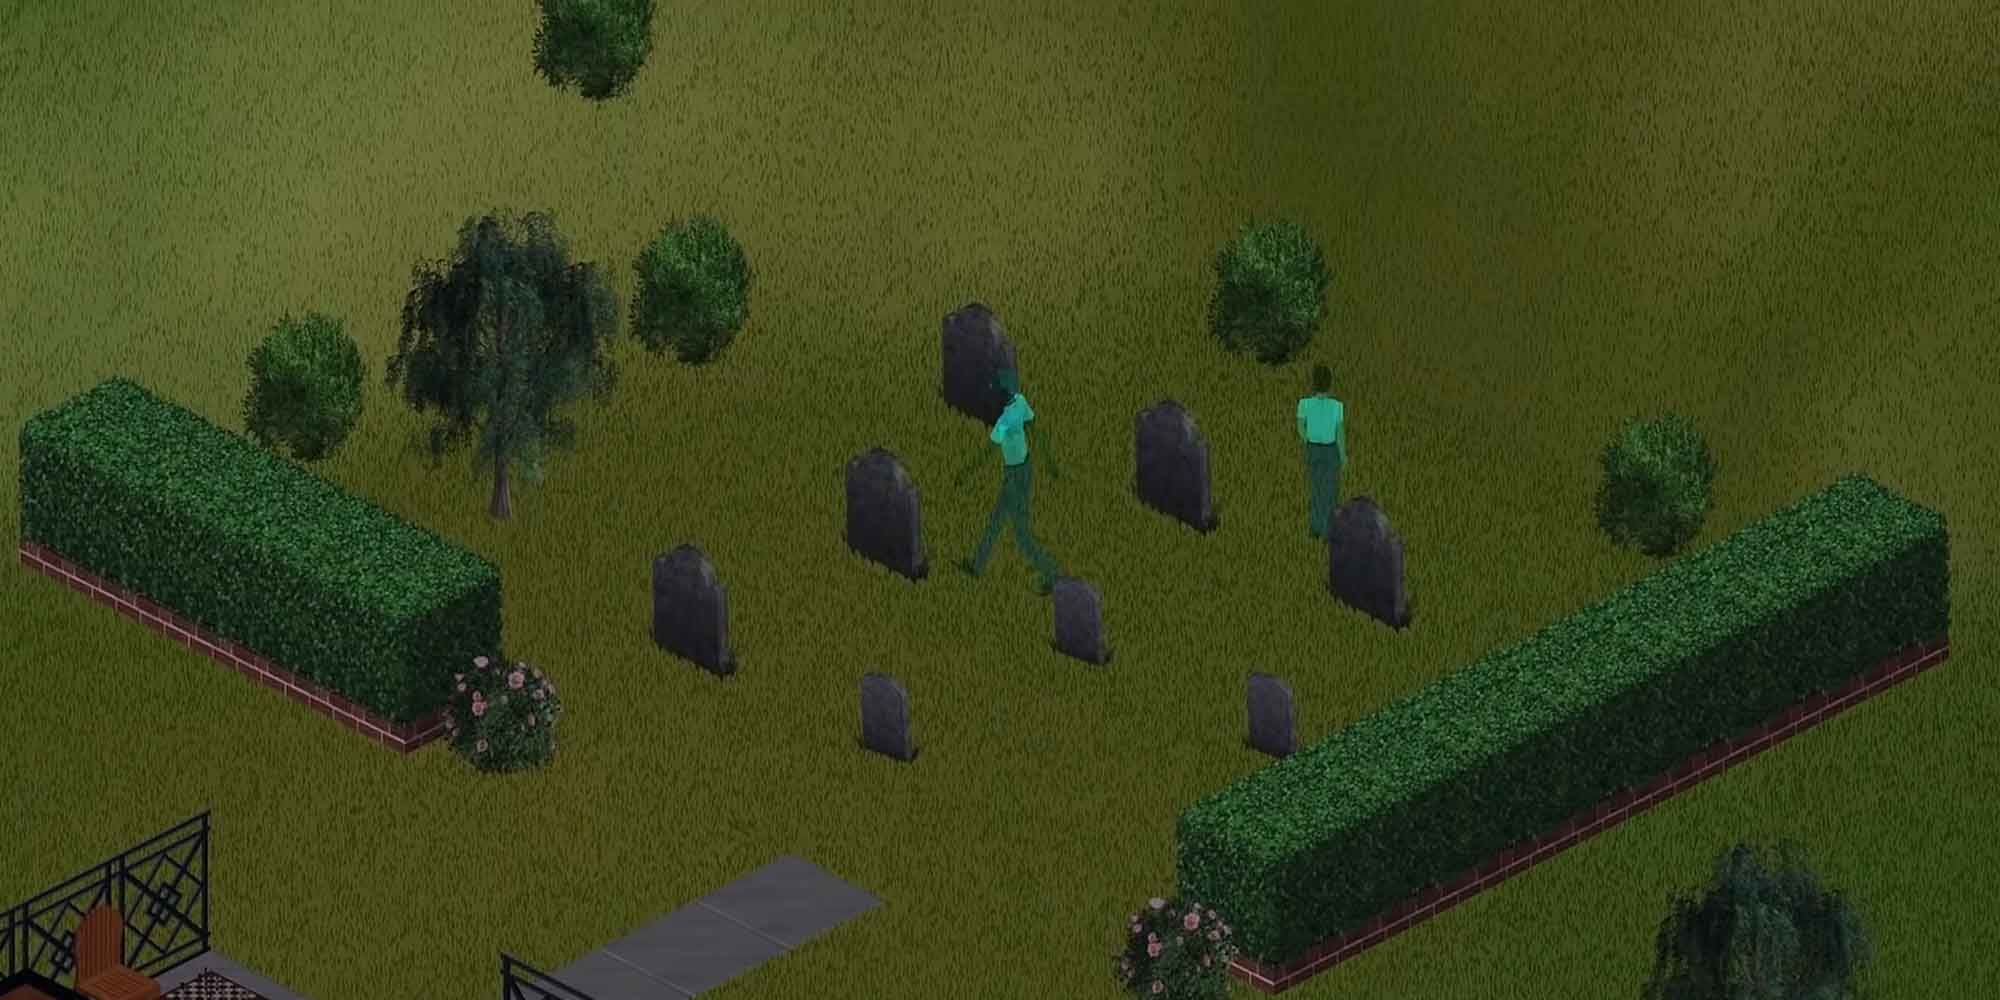 Building a graveyard in The Sims